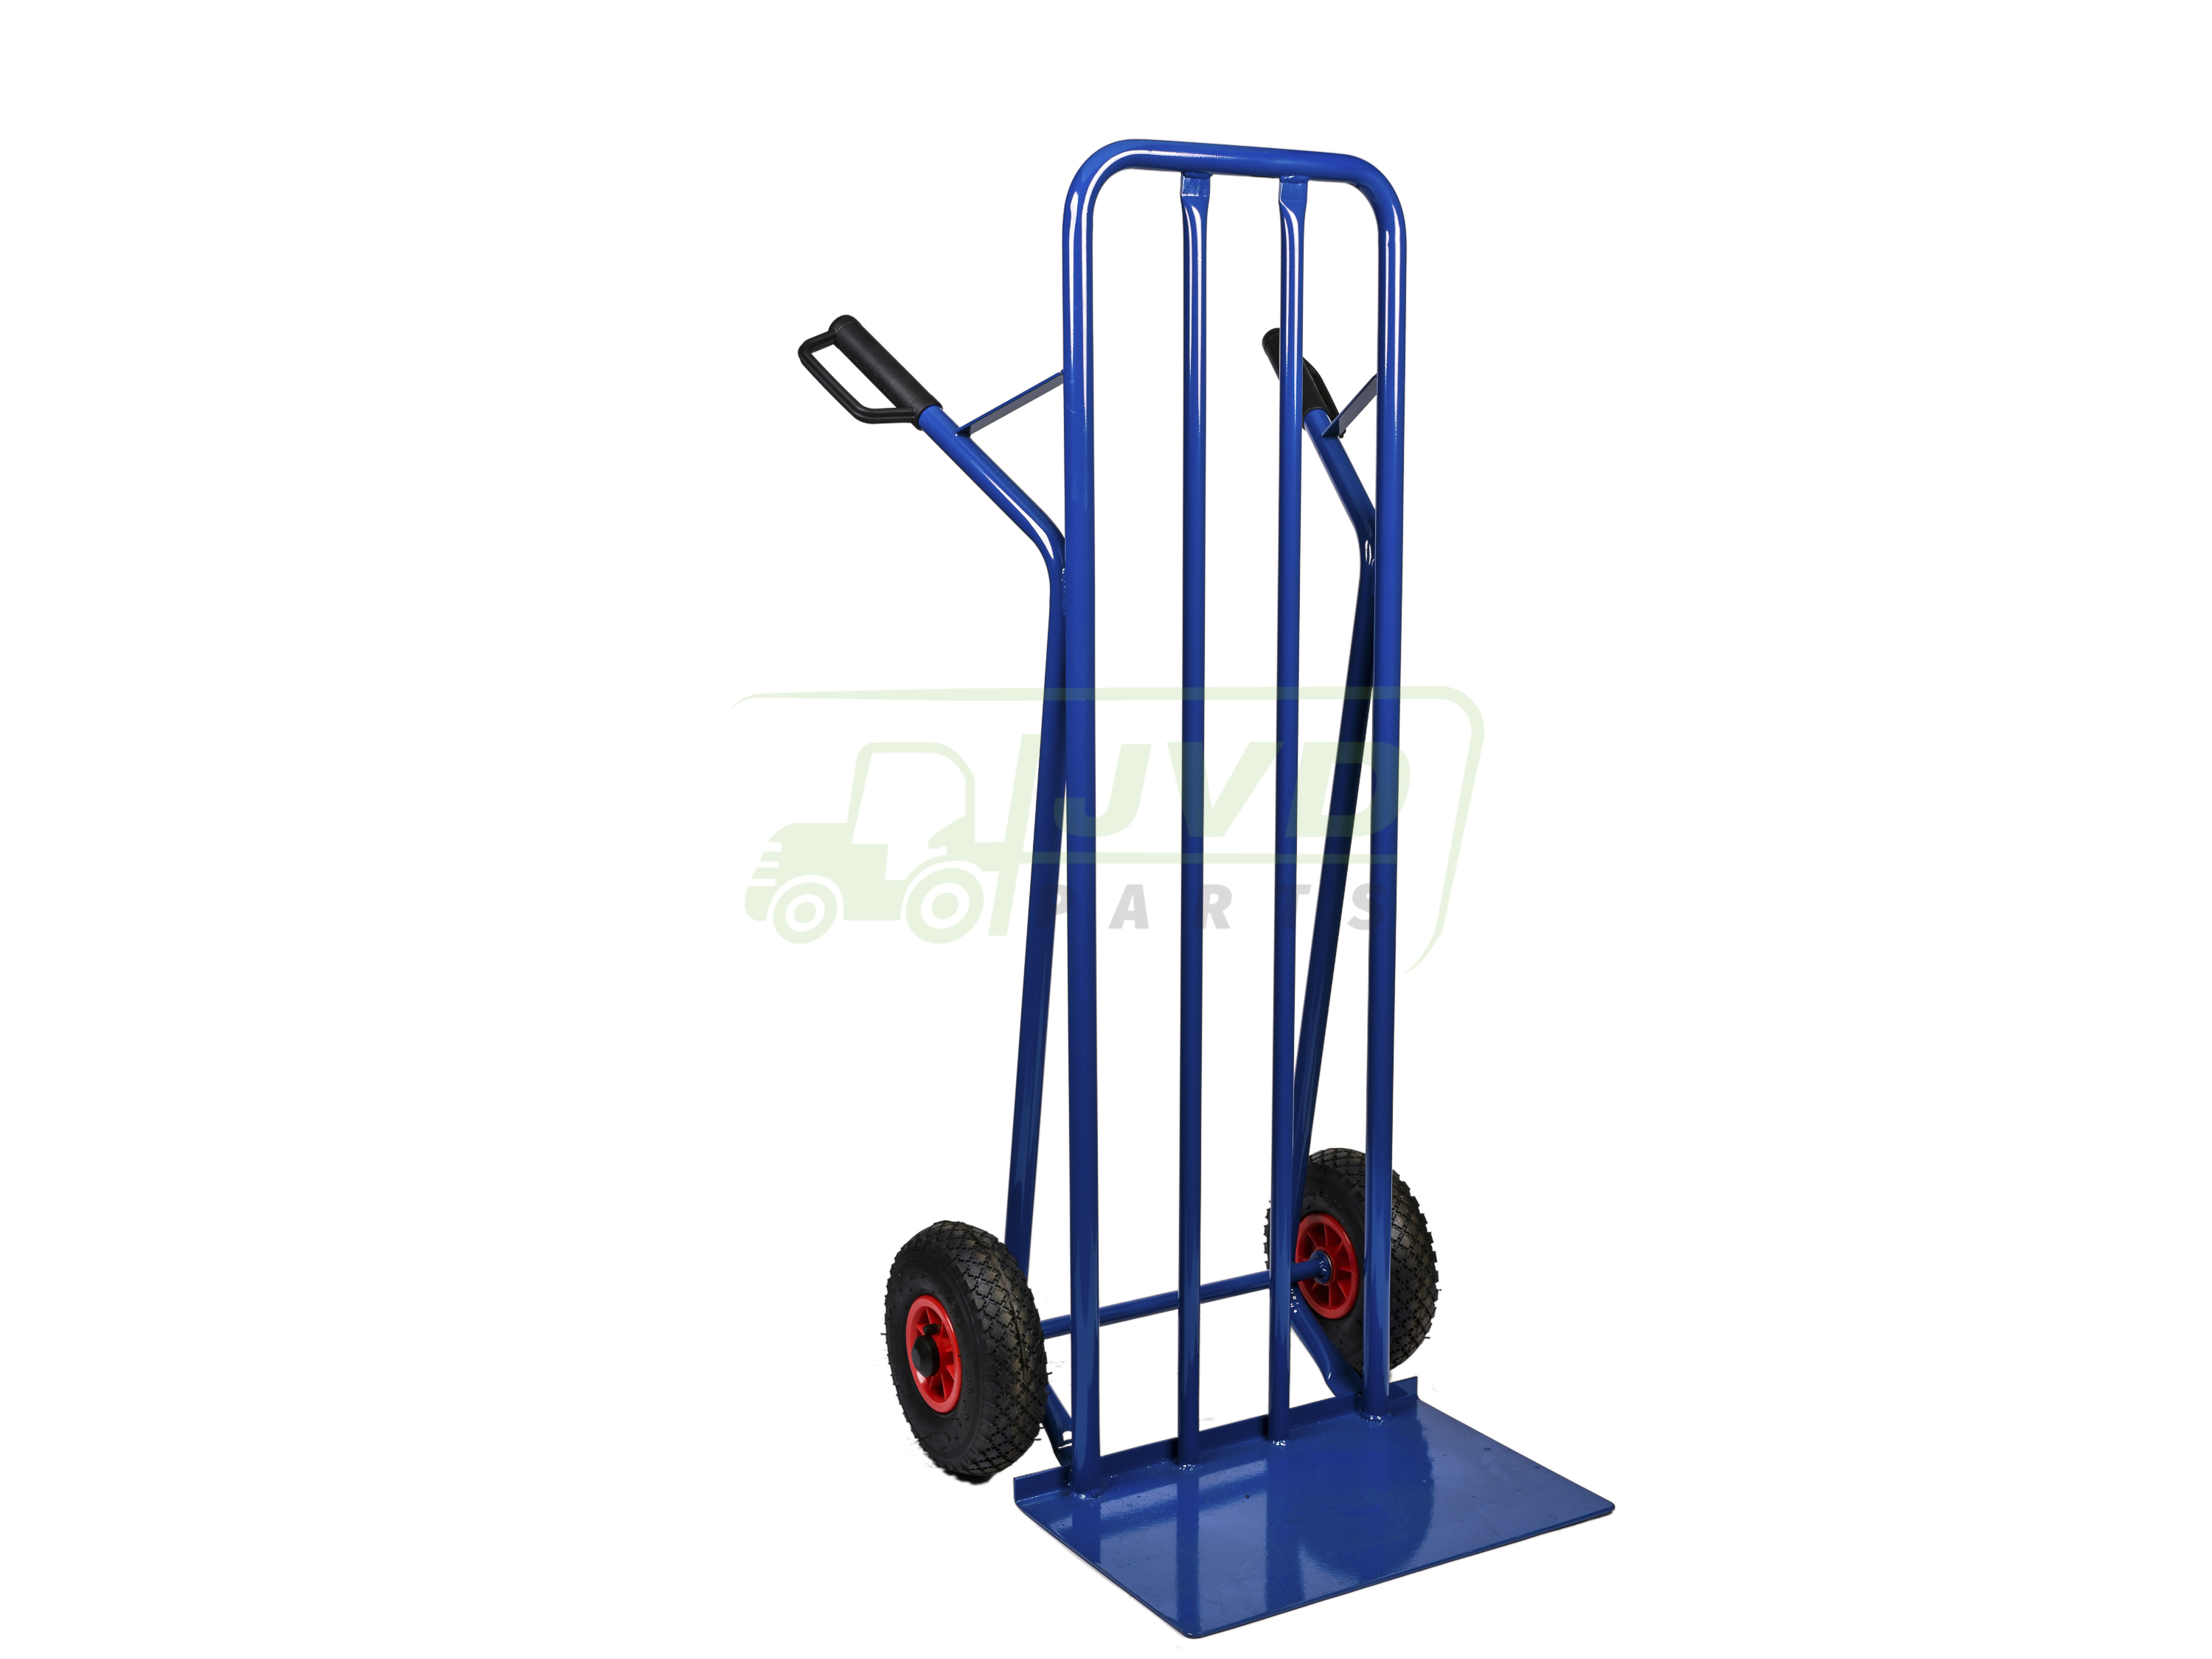 Handtrolley, Height 1300mm - Plate (500x300mm)